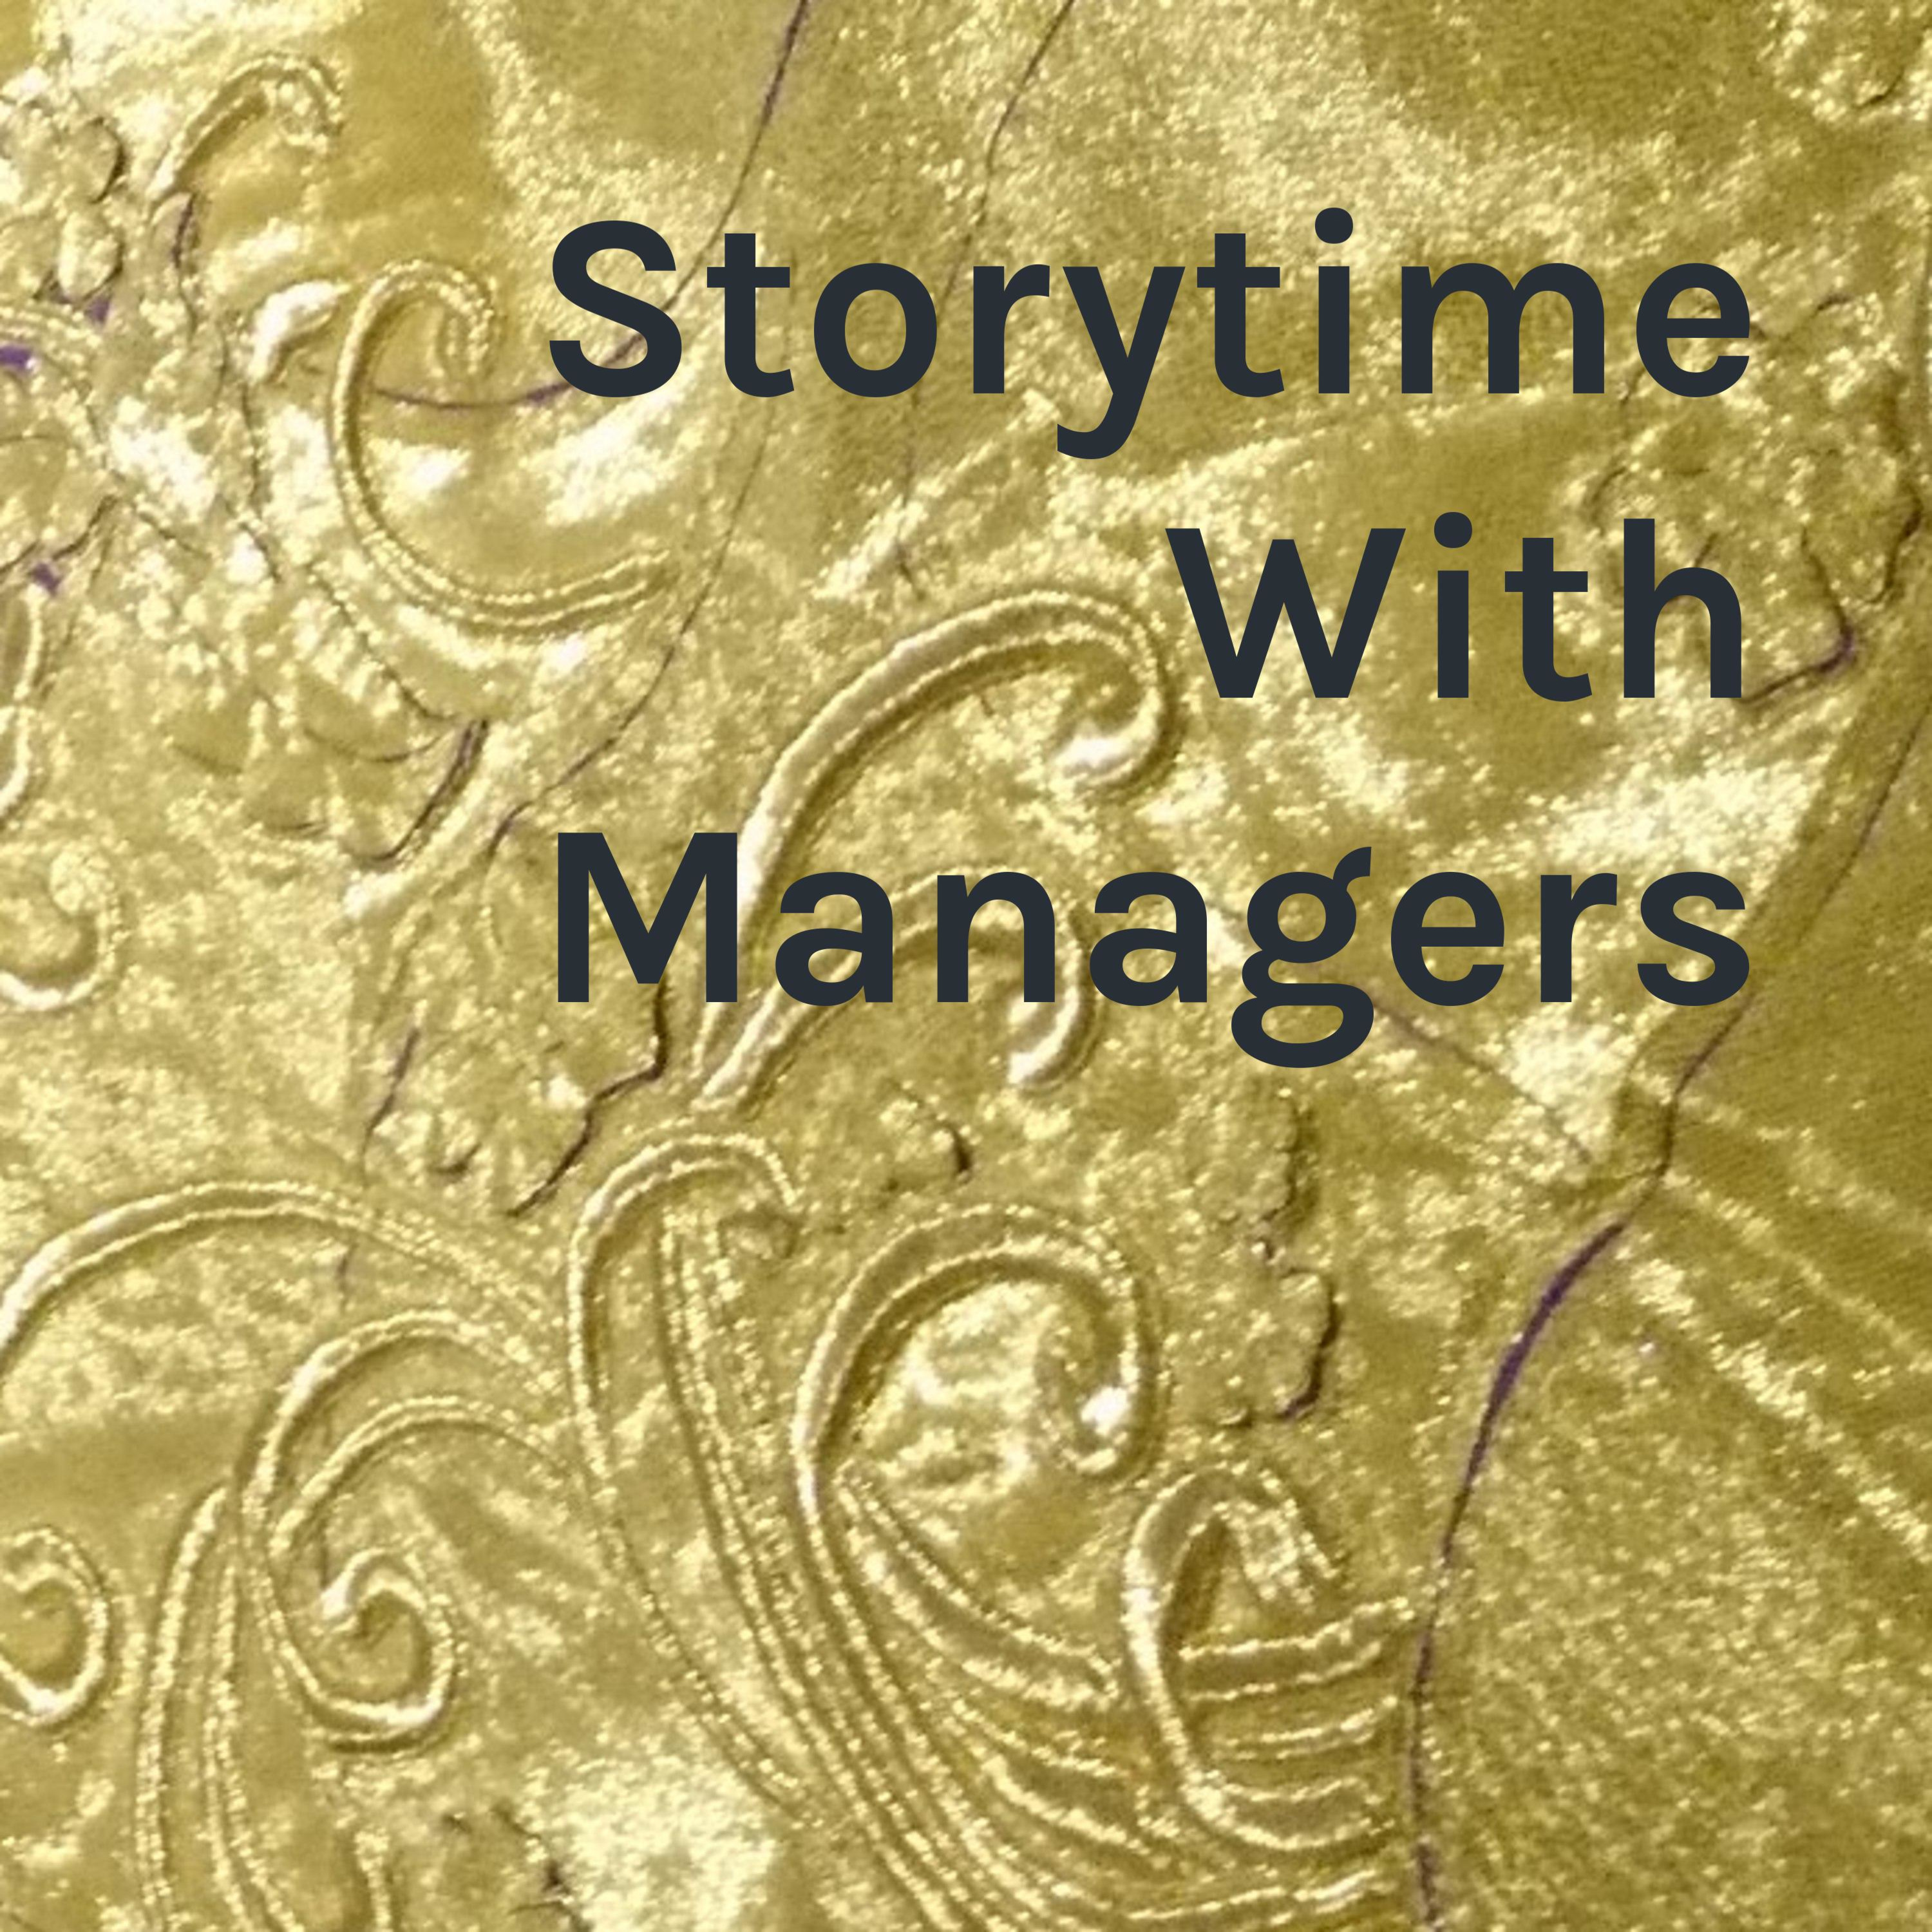 Cover art for podcast Storytime With Managers